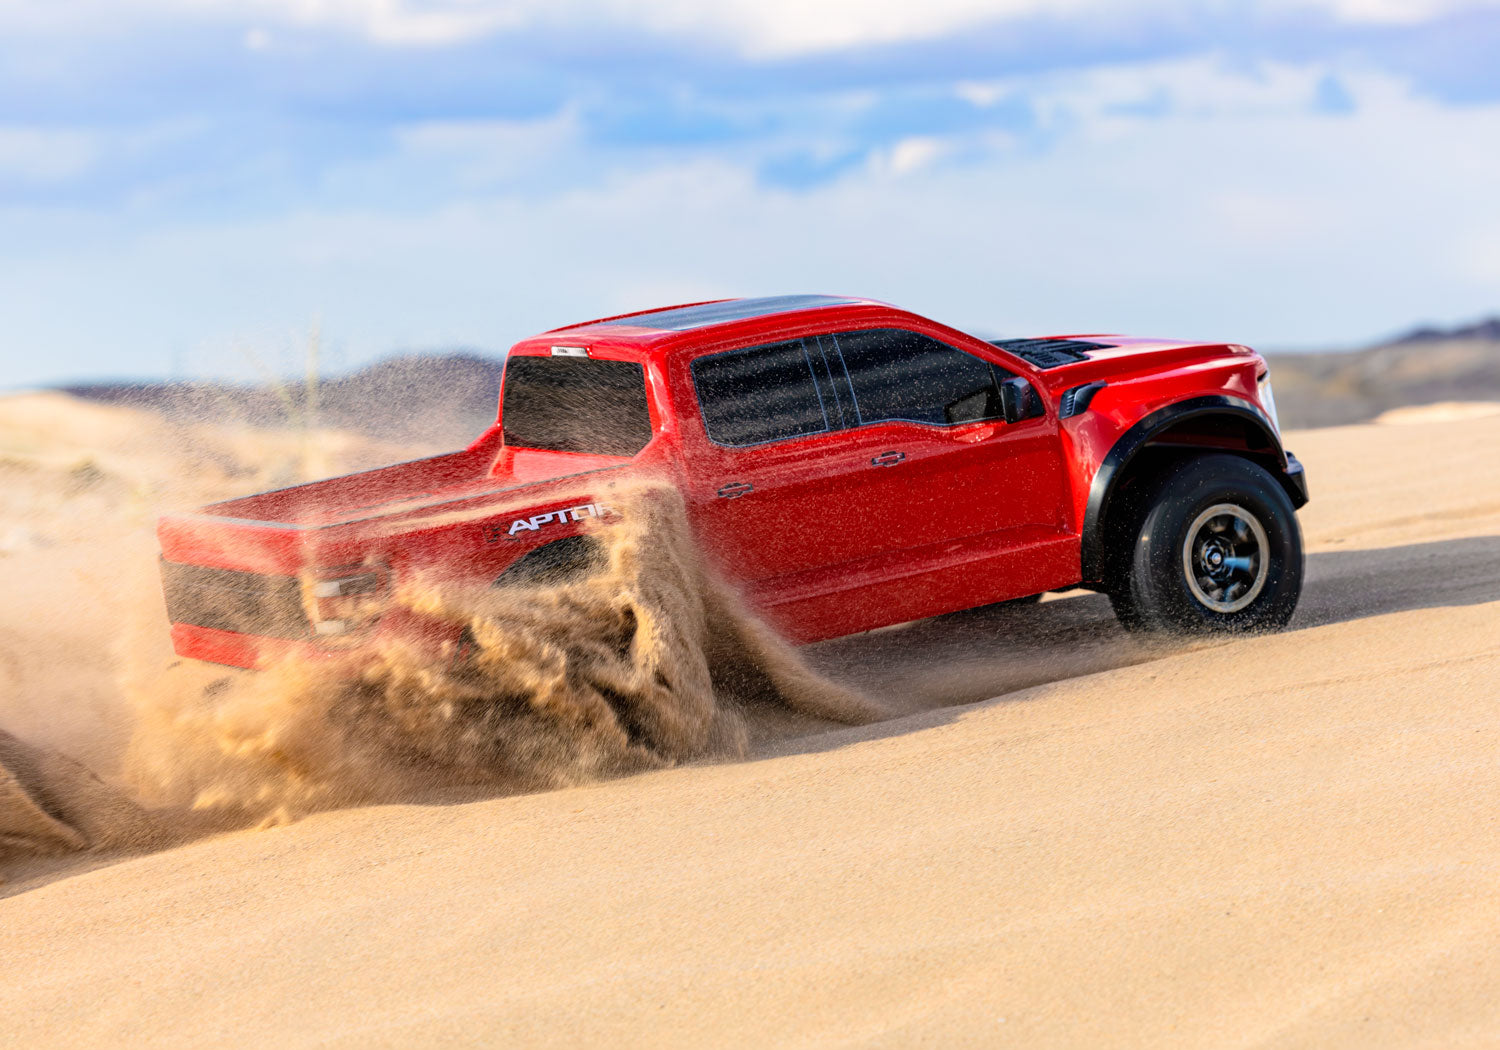 Ford Raptor R: 4X4 VXL 1/10 Scale 4X4 Brushless Replica Truck RED - Available for in-store purchase on August 4th